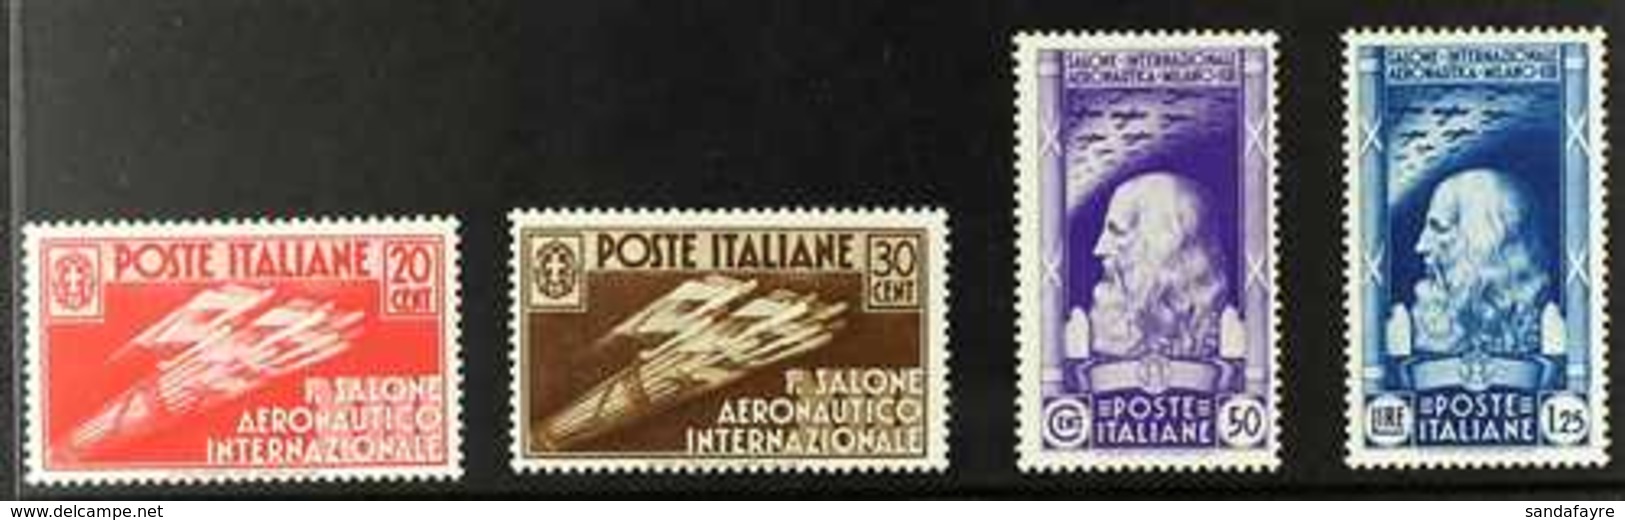 1935 International Aeronautical Exhibition Complete Set (Sass. S. 81, SG 458/61), Never Hinged Mint. Scarce Thus! (4 Sta - Unclassified